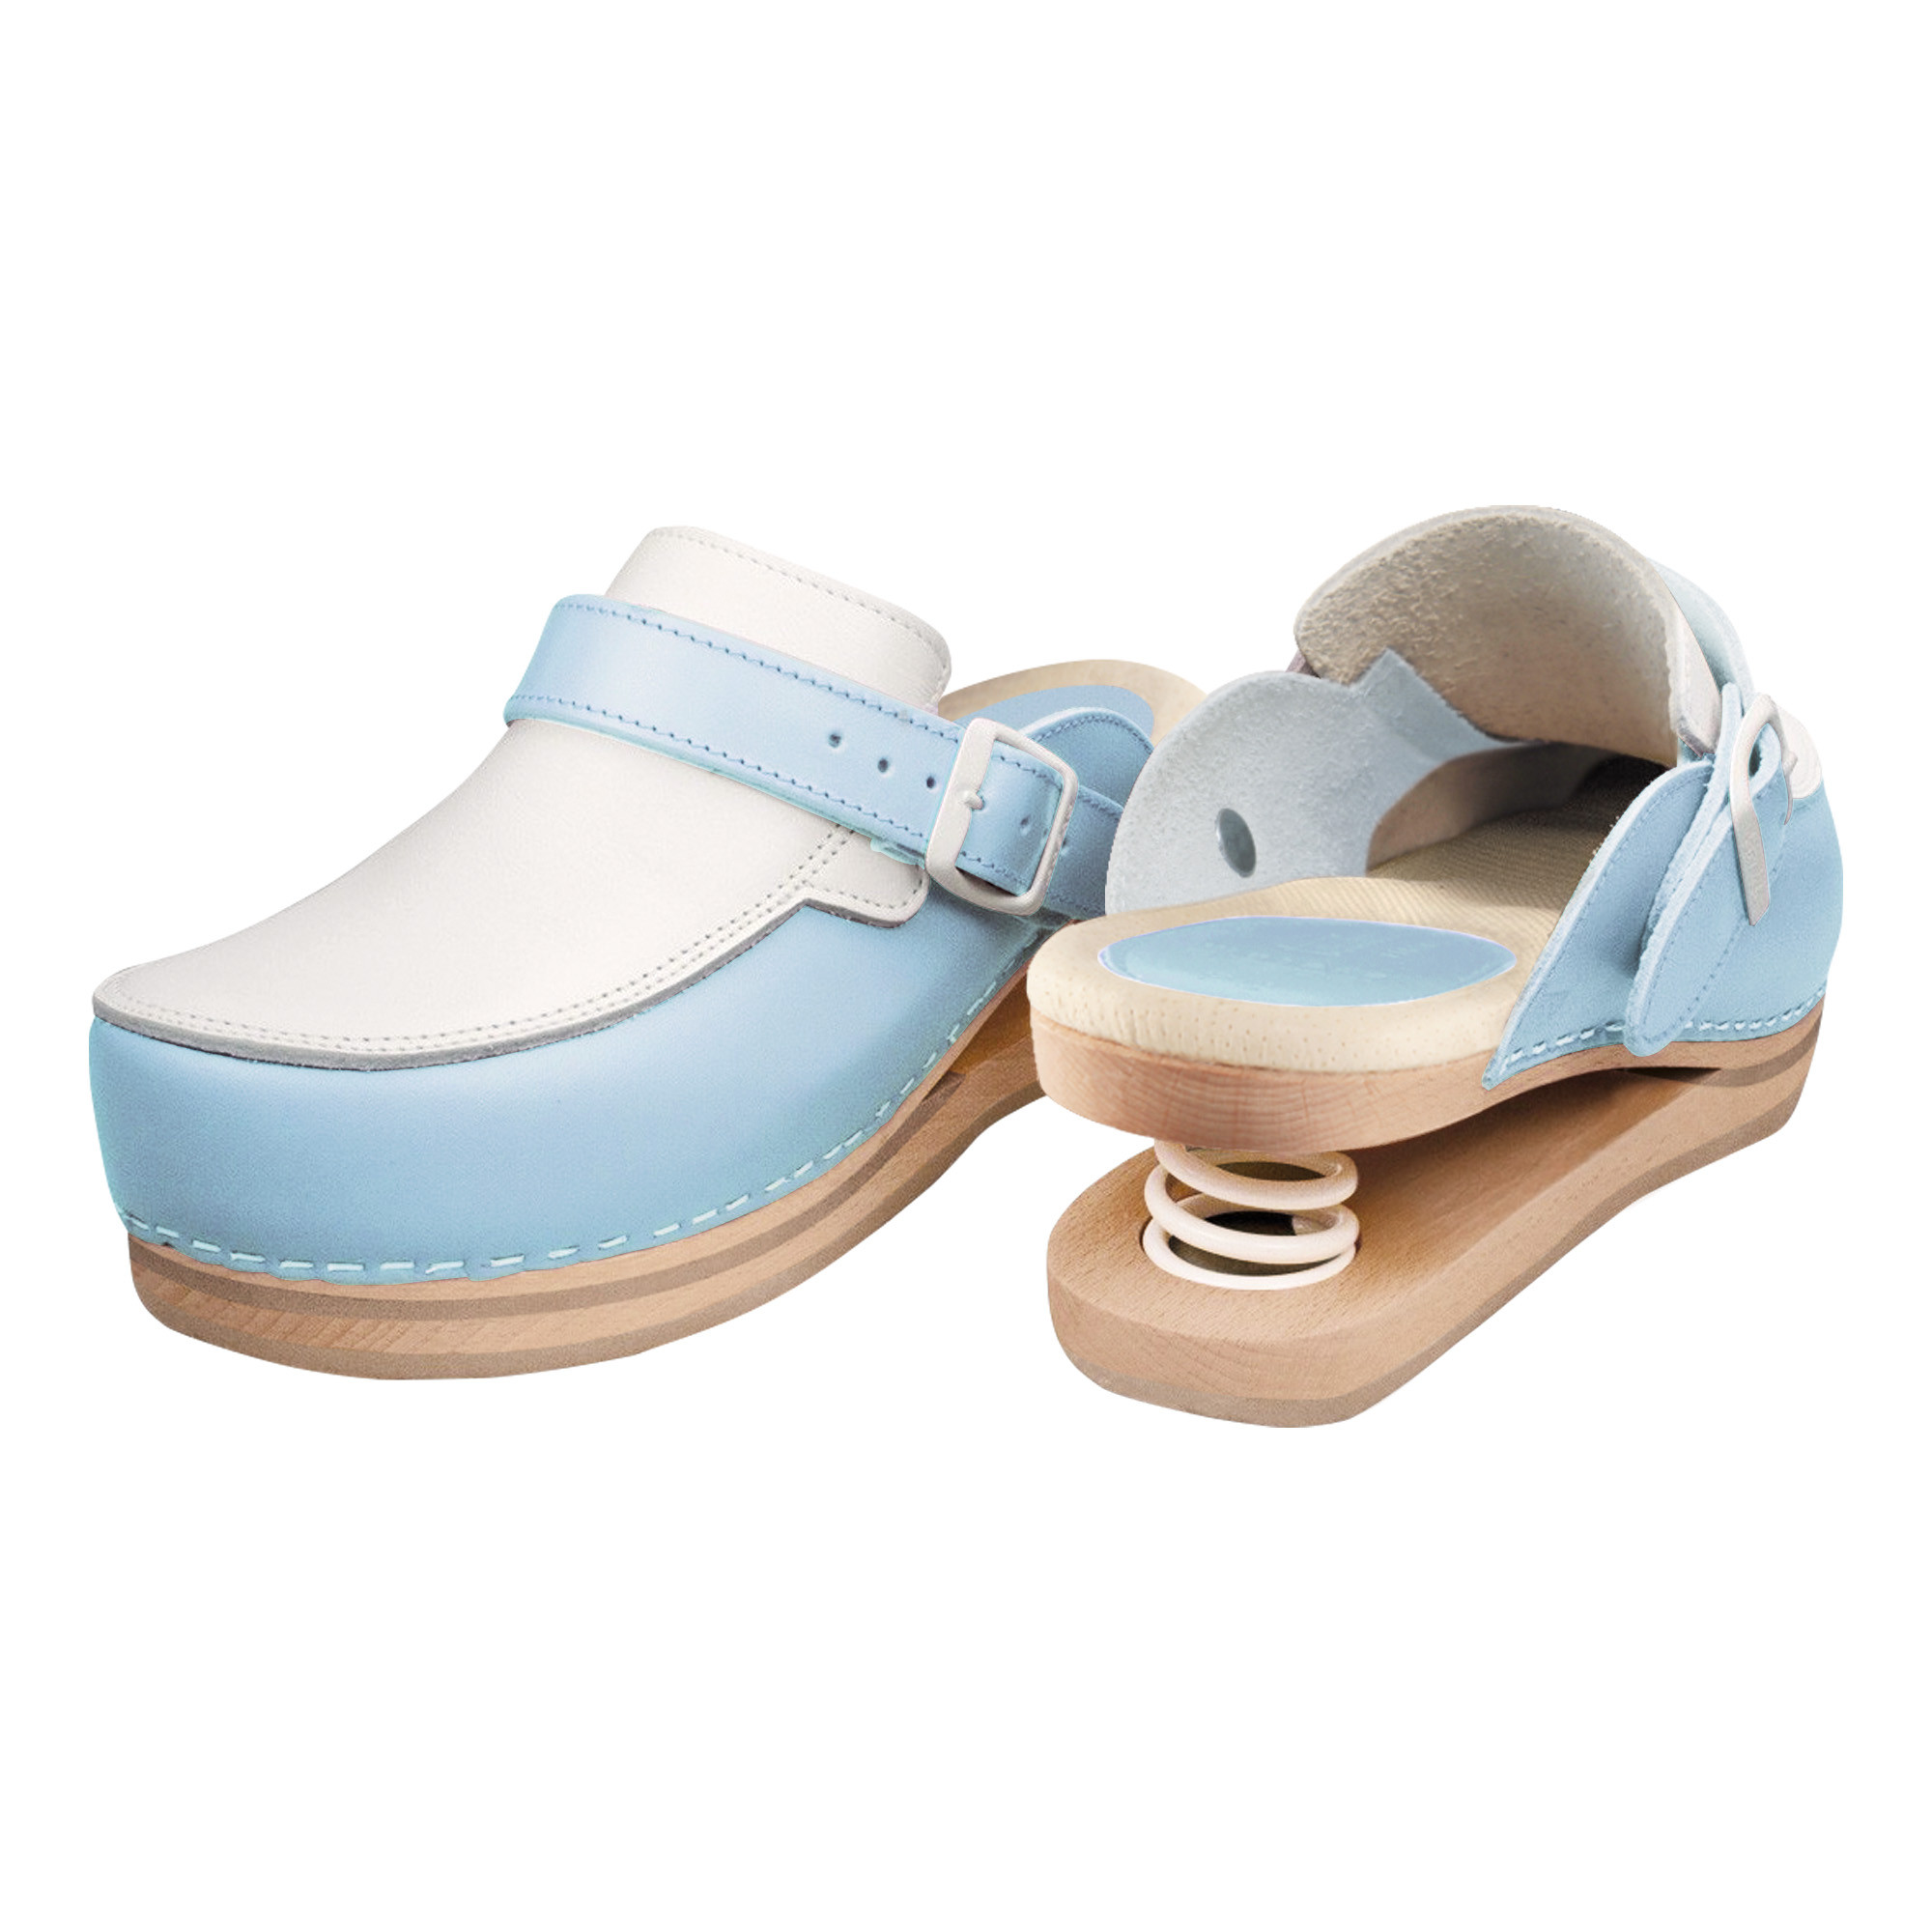 Relax clogs closed with blue spring Size 36